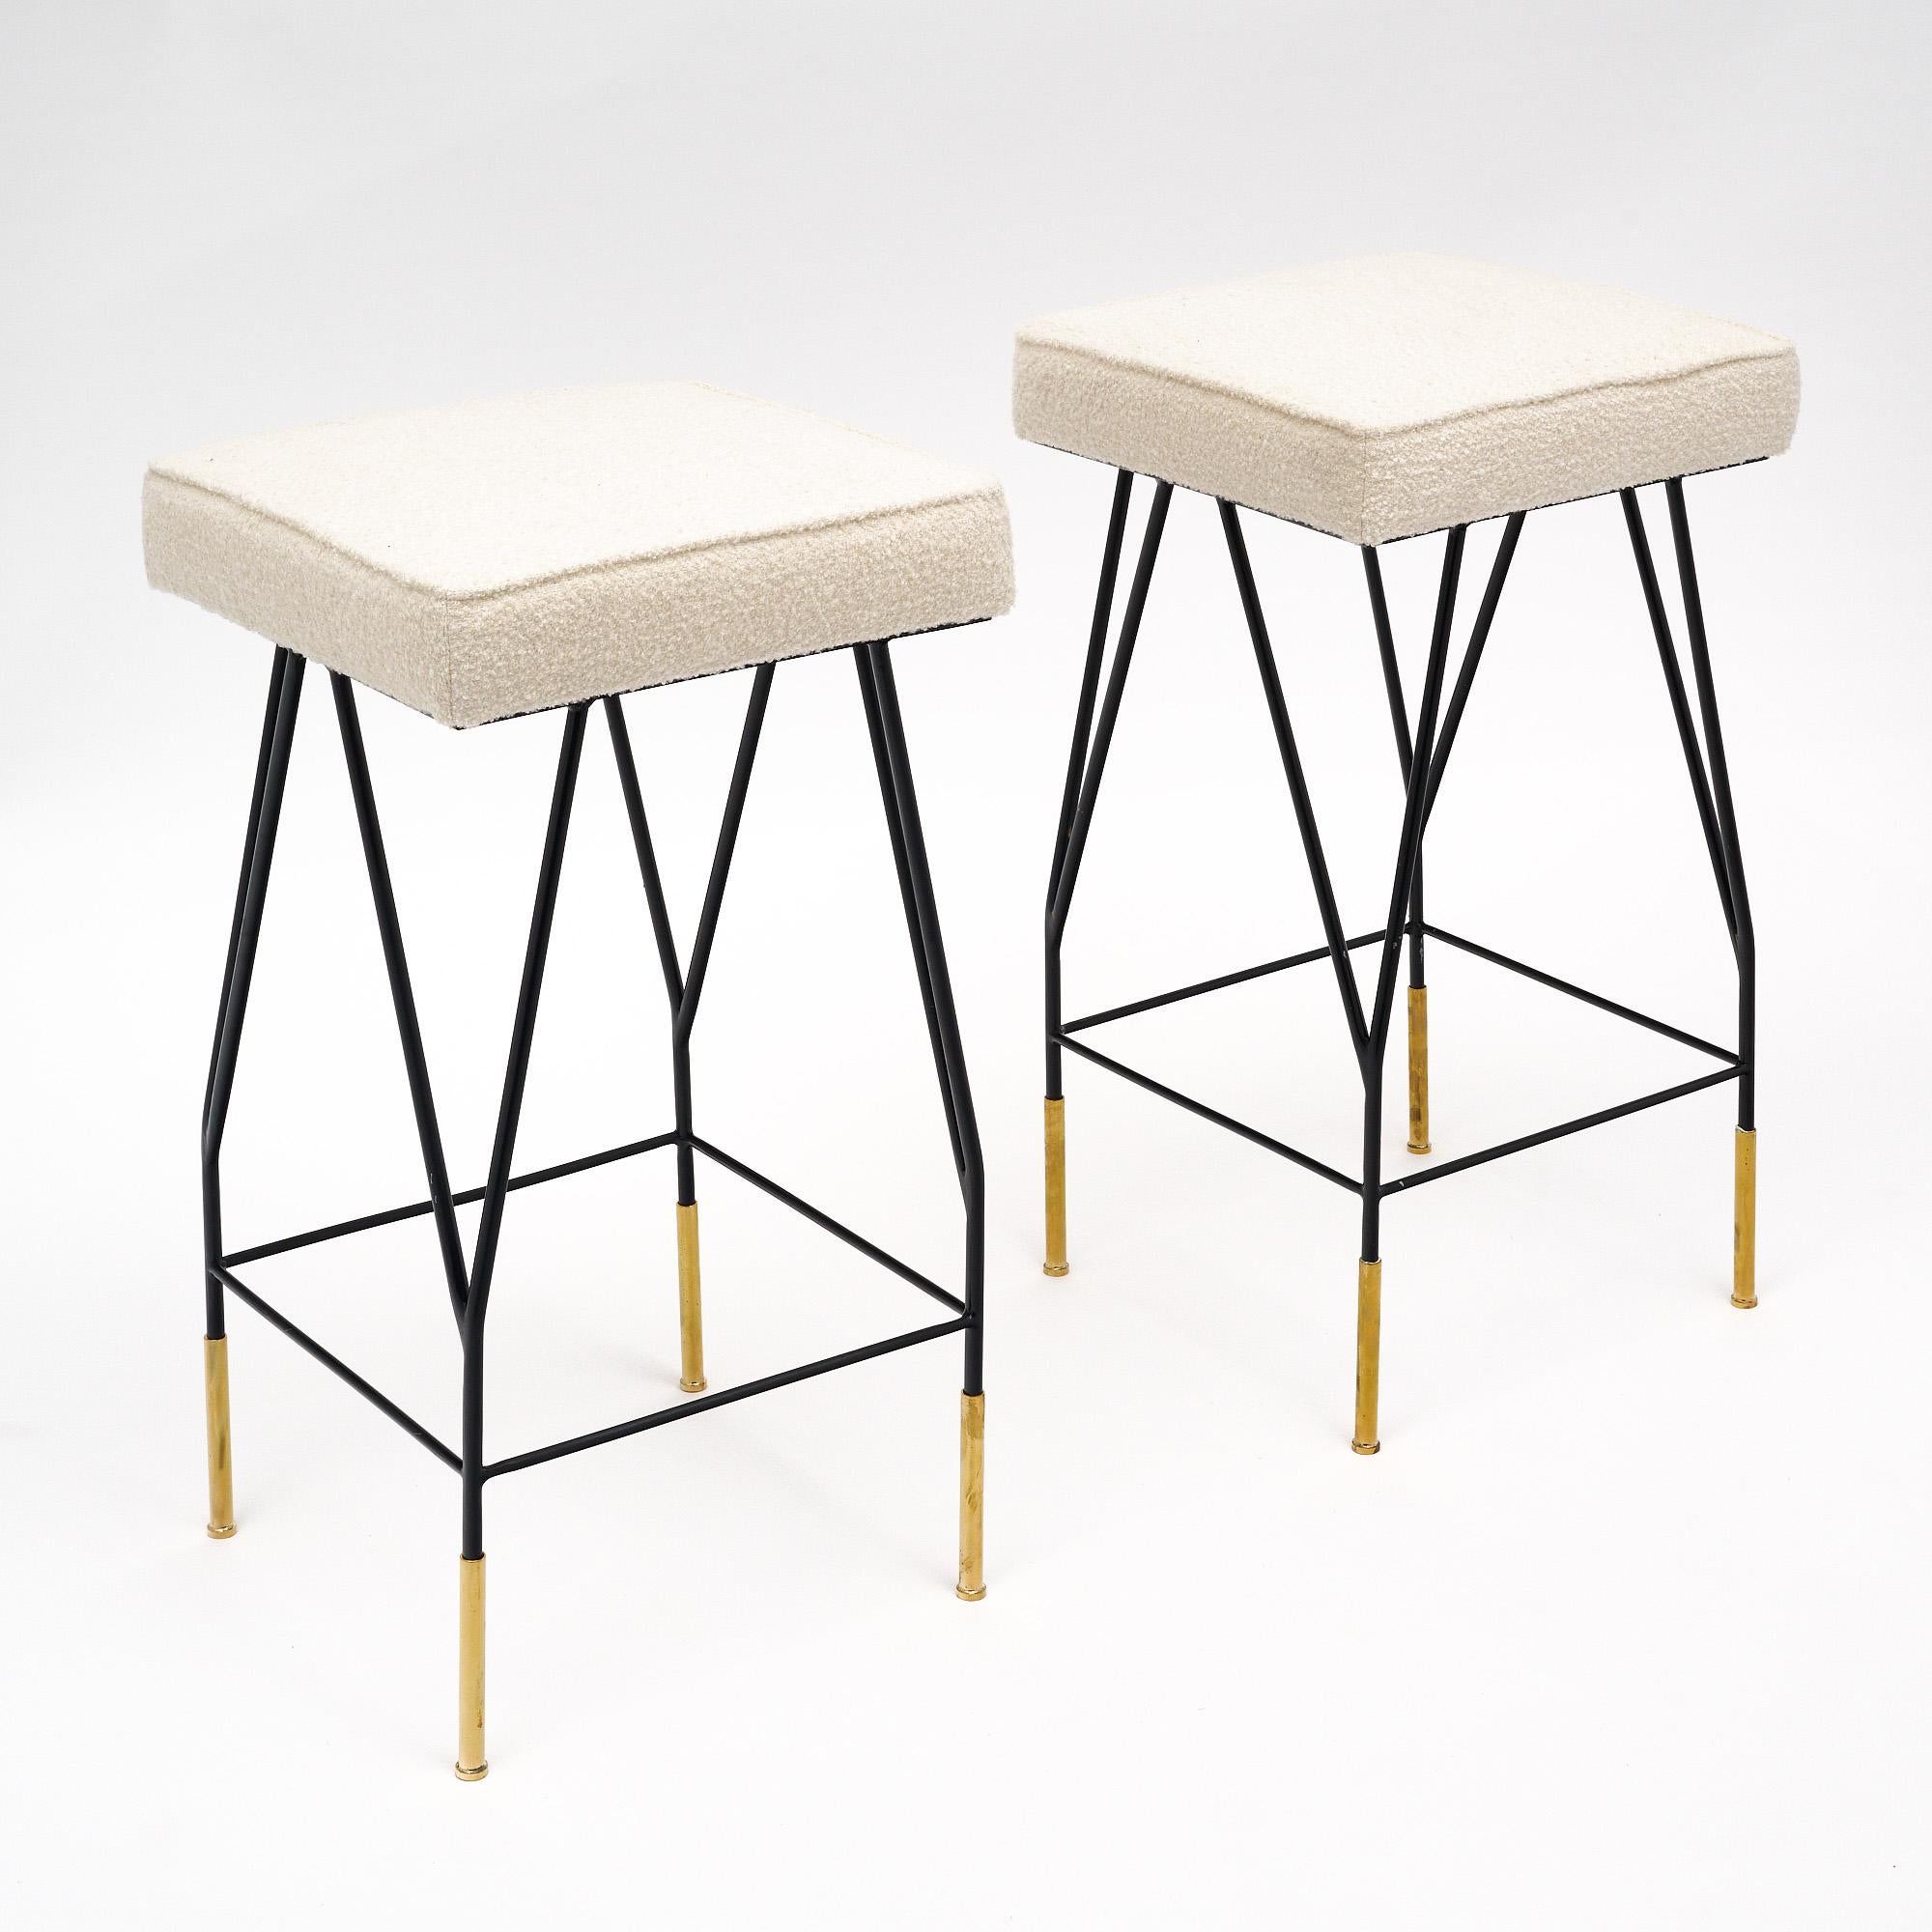 Pair of Italian barstools with black lacquered steel and brass legs. New upholstery is done in a white wool blend.
